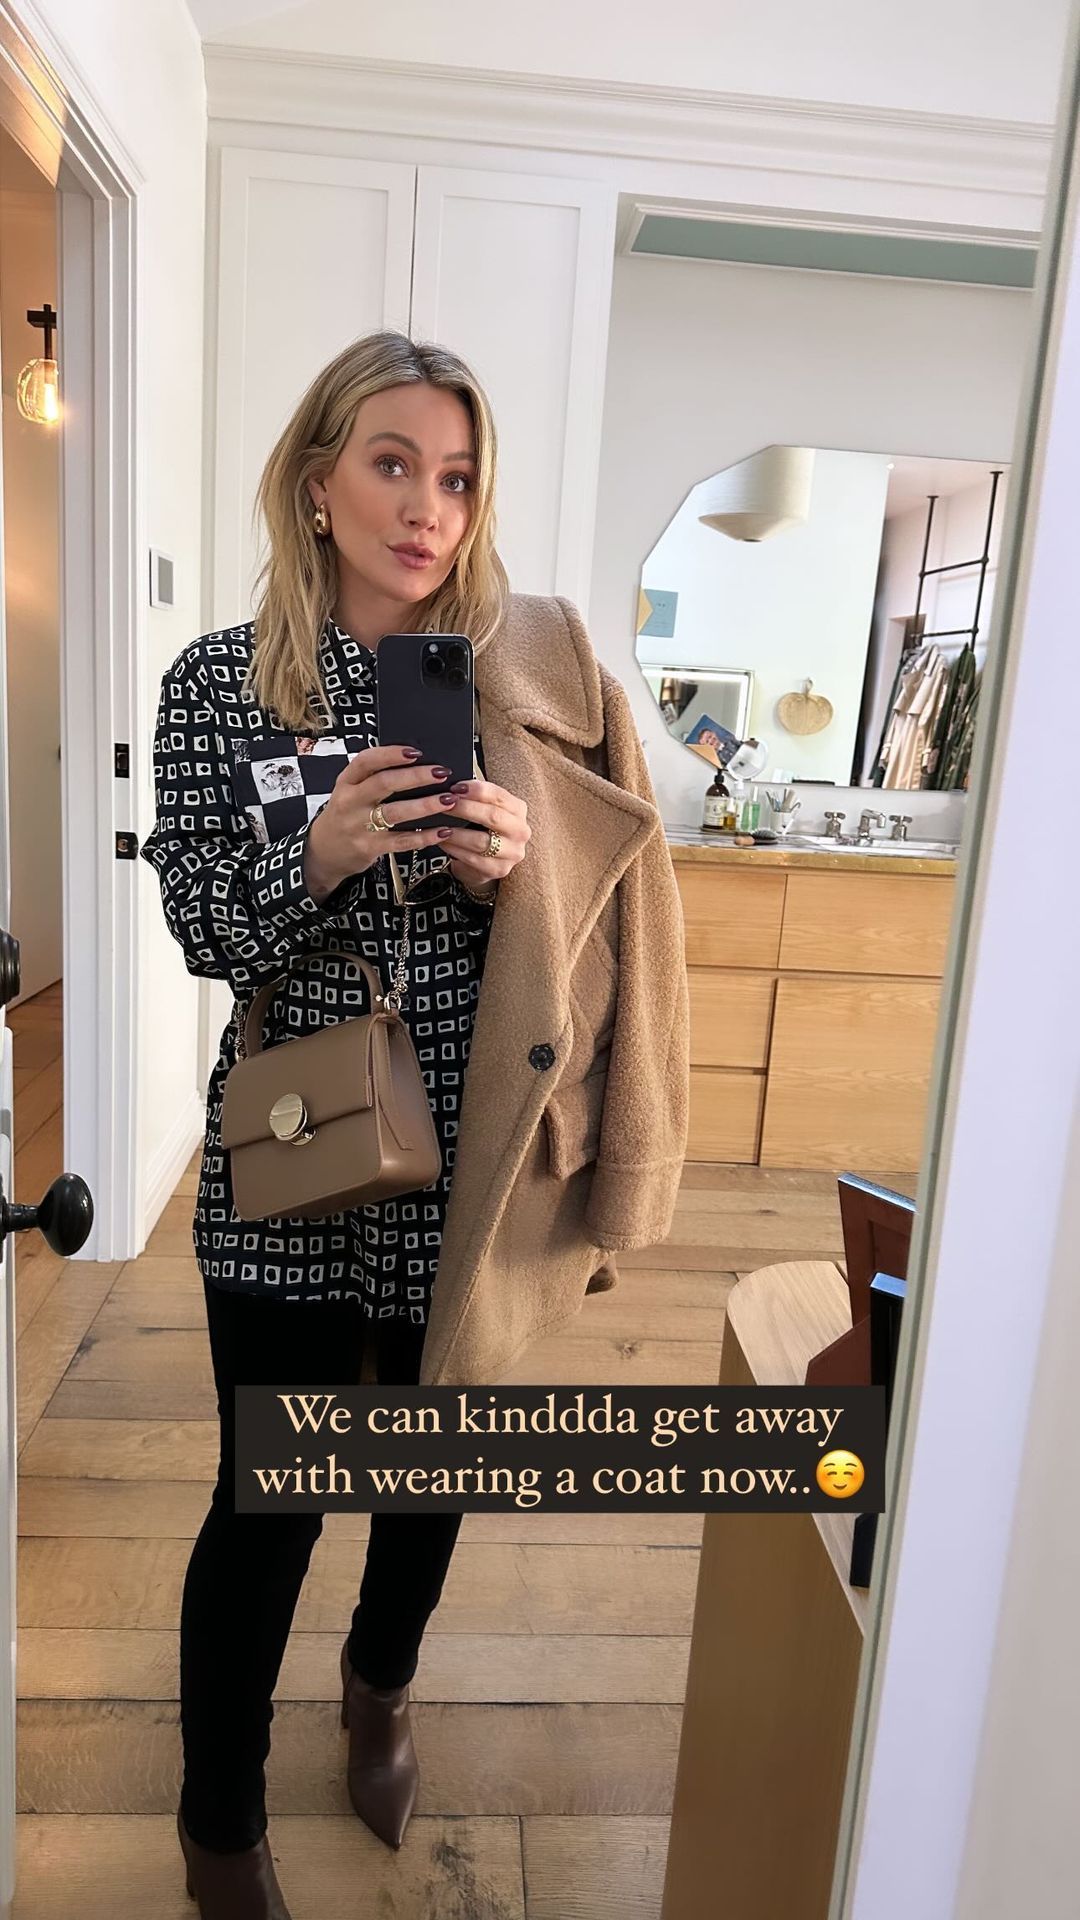 Prior to Hilary's pregnancy announcement, fans speculated that she was pregnant